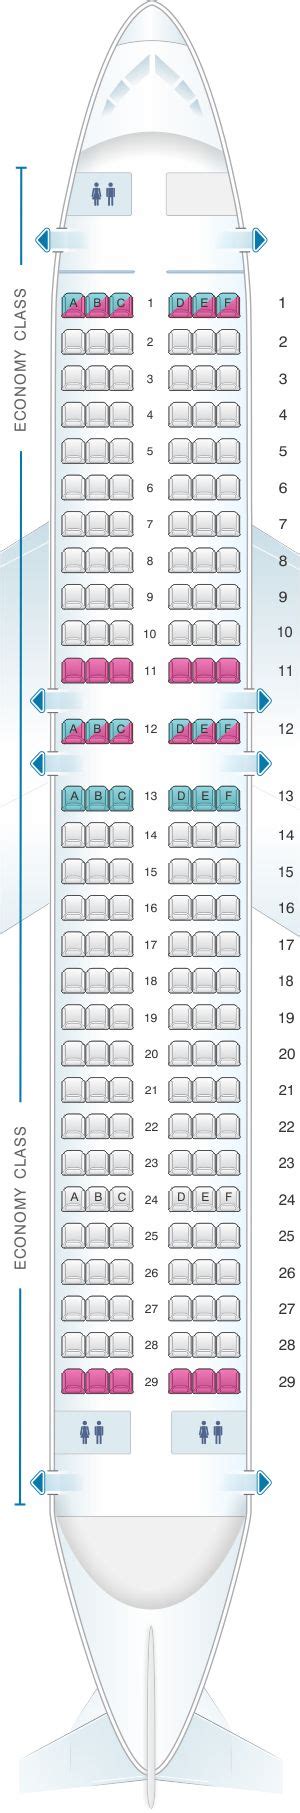 Seat Map Aer Lingus Airbus A320 Air Transat Asiana Airlines Seating